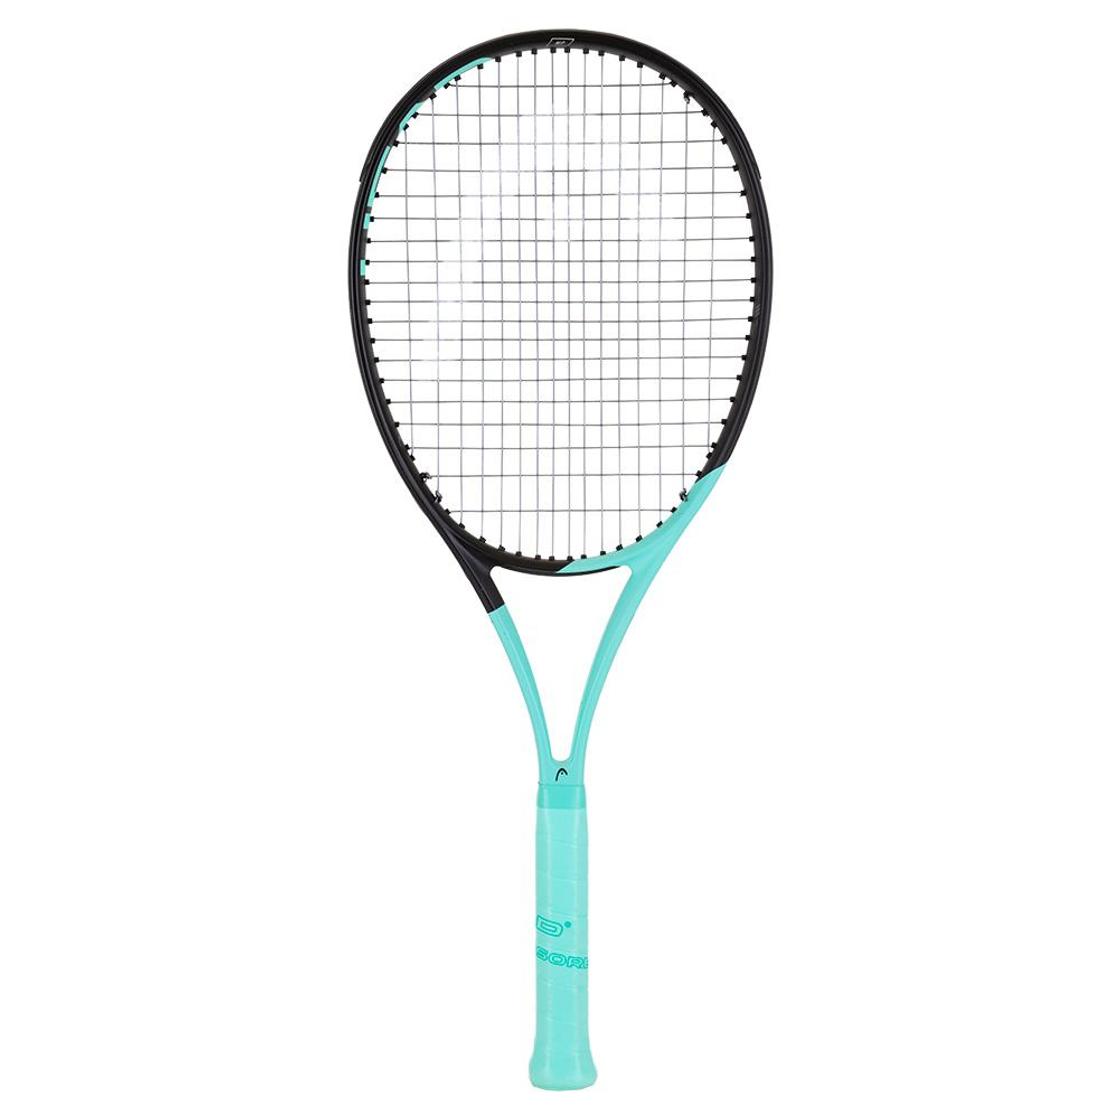 tennis racket for beginners, especially adults